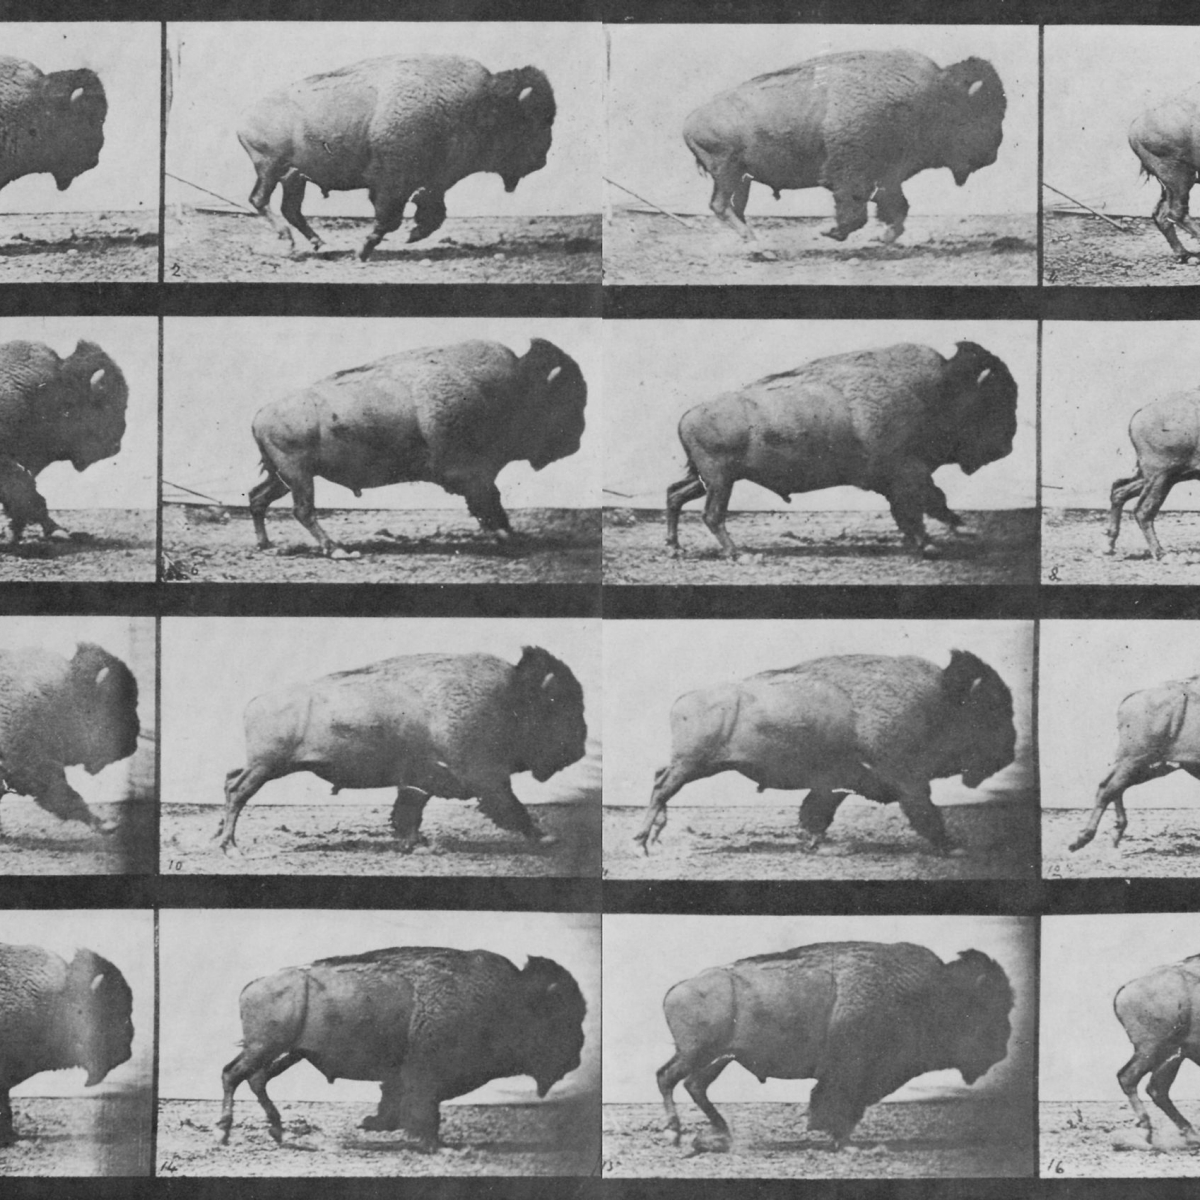 Contact sheet photographs by Robert Seidman portraying buffalo in motion, frame by frame